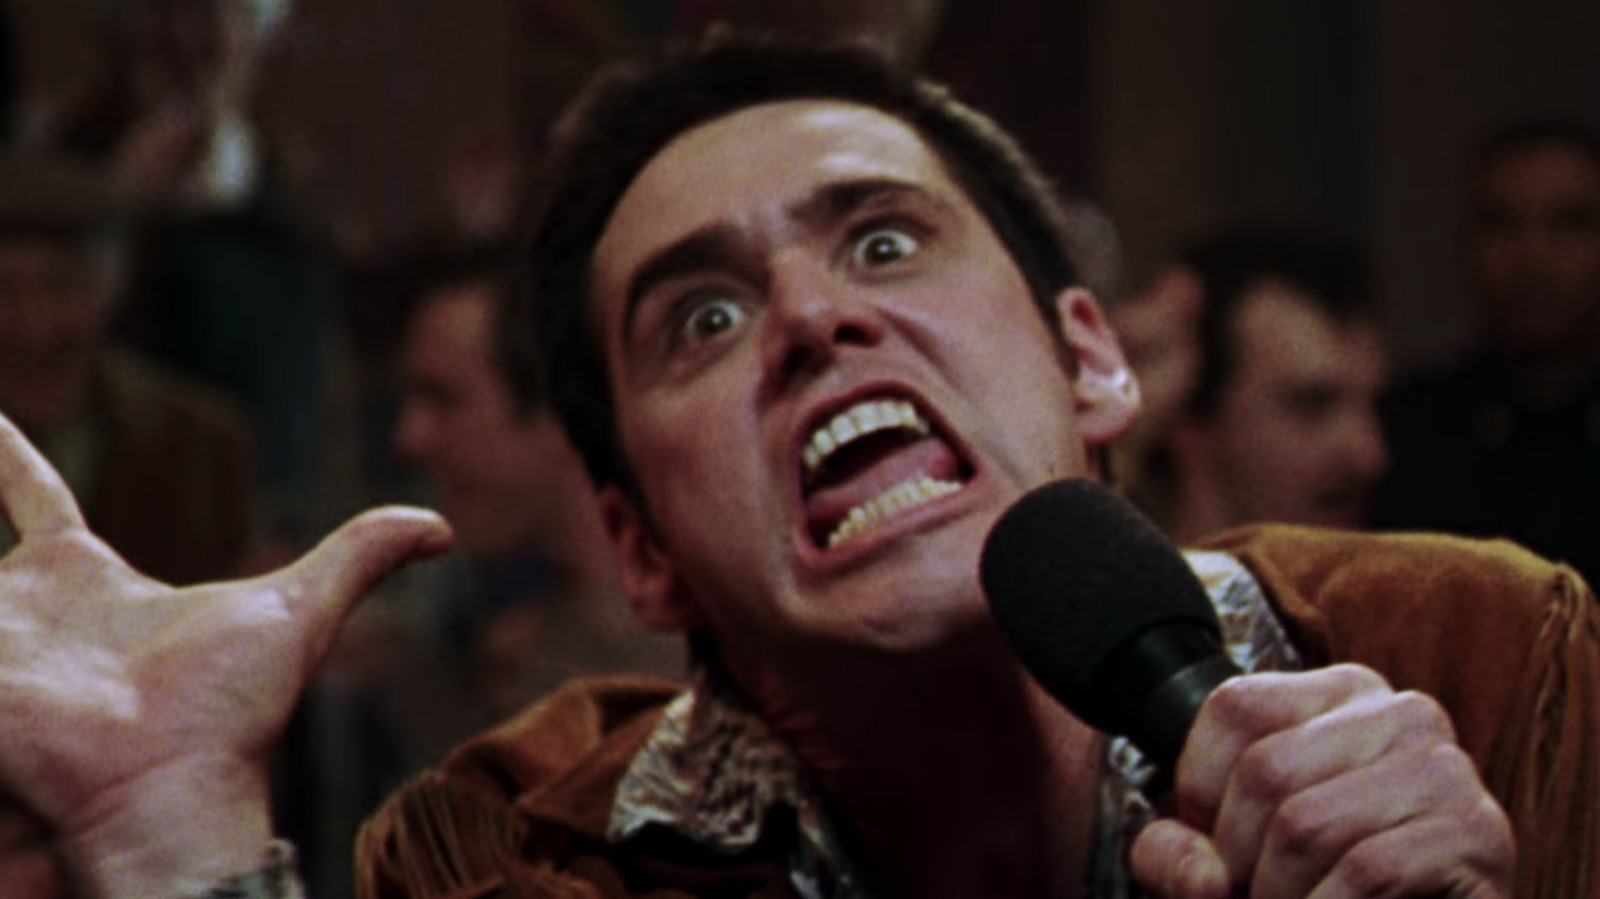 The Jim Carrey Role That Changed Hollywood Forever